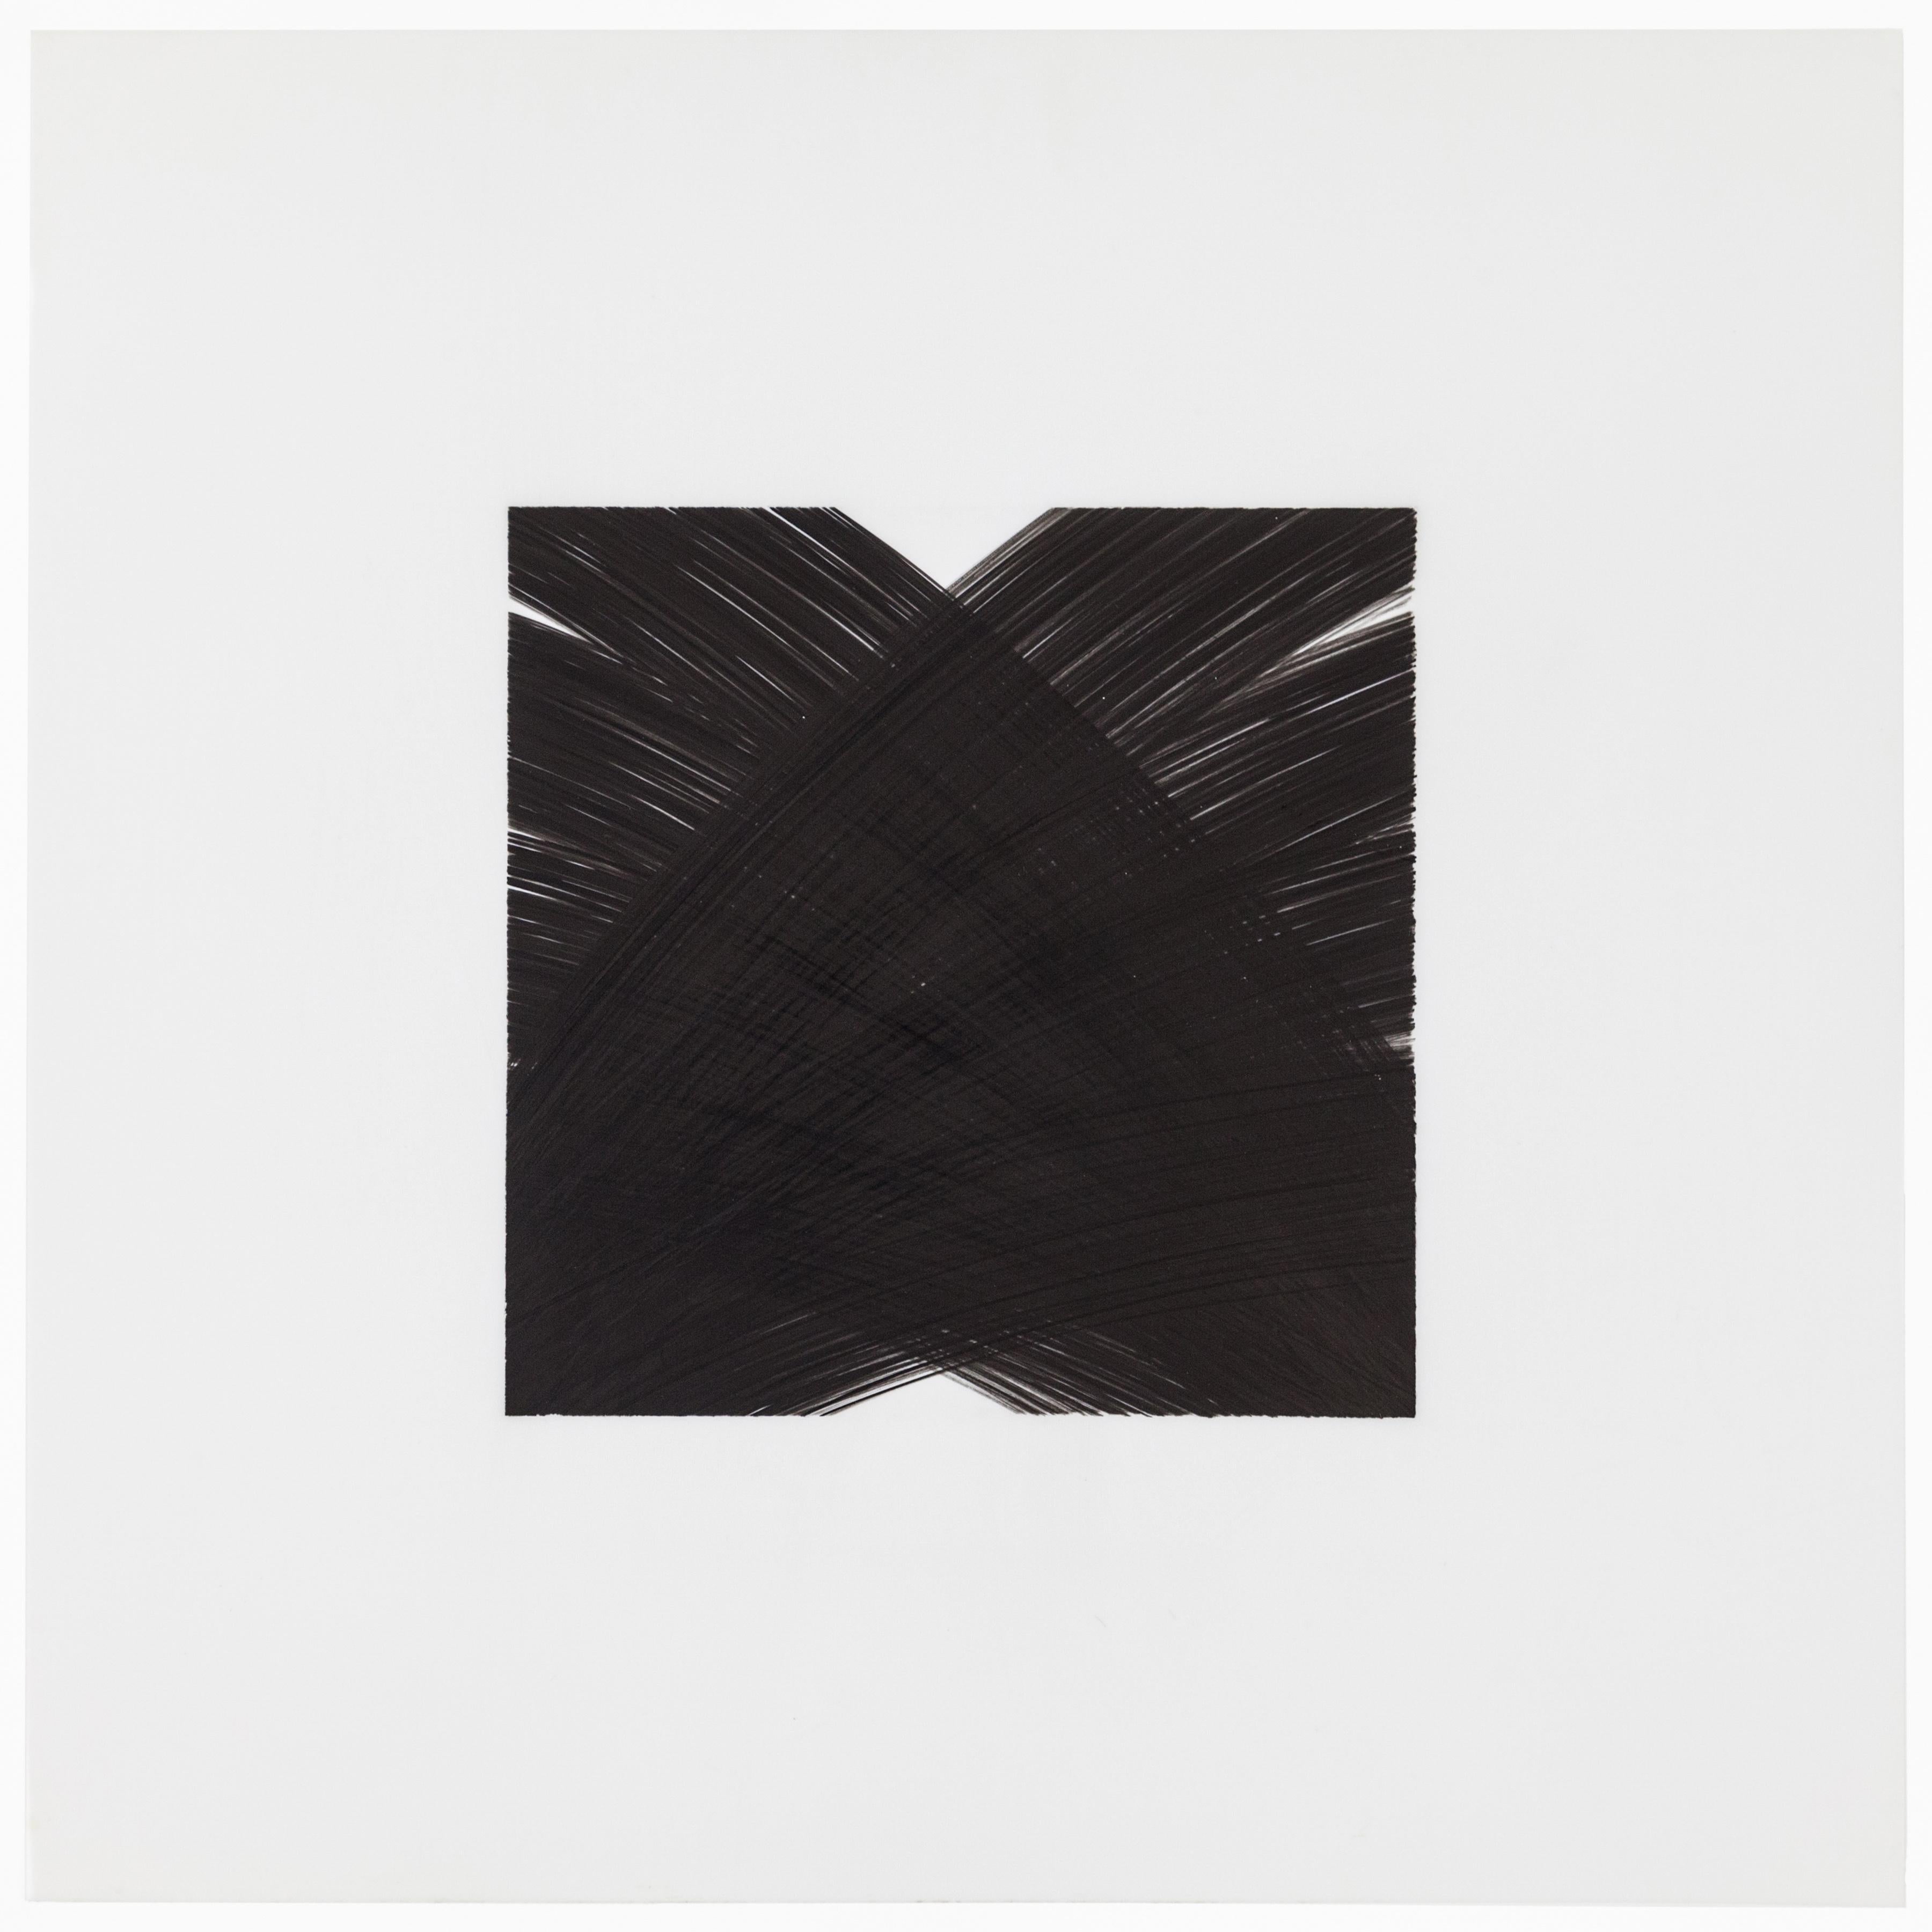 Patrick Carrara Black Ink on Mylar Drawings, Appearance Series, 2014 - 2017 In Excellent Condition For Sale In New York, NY